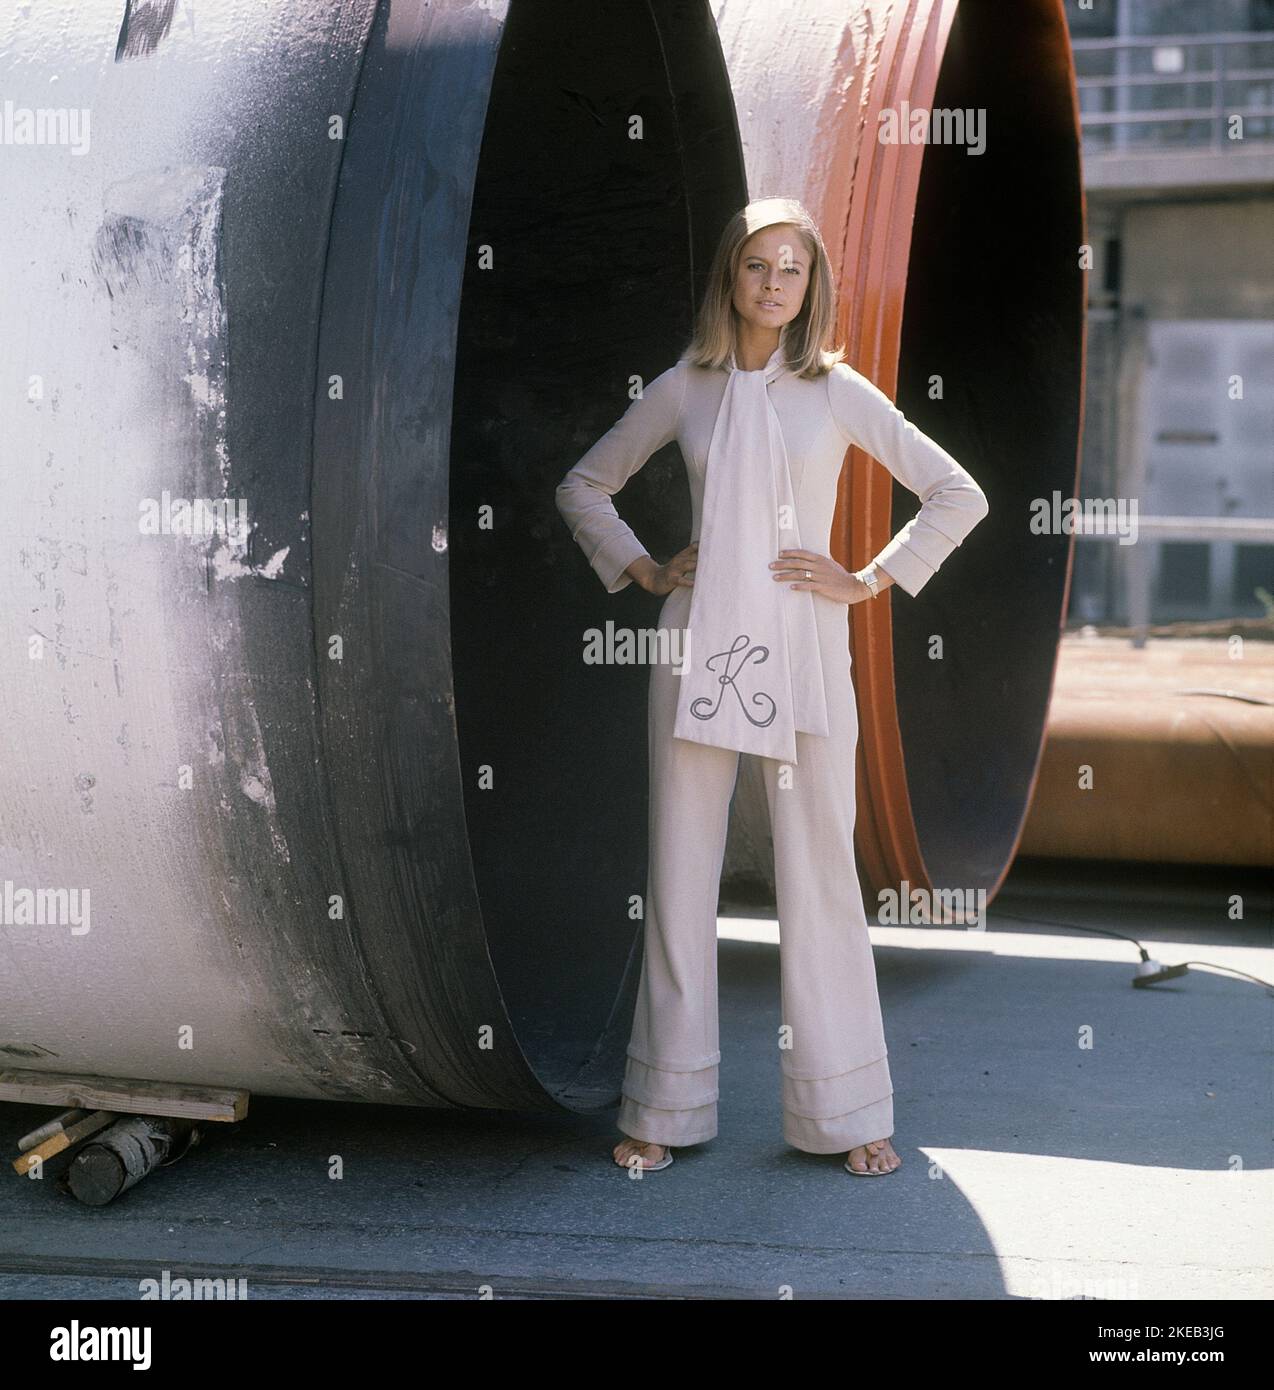 Woman Trousers 1960s Hi-res Stock Photography And Images, 48% OFF